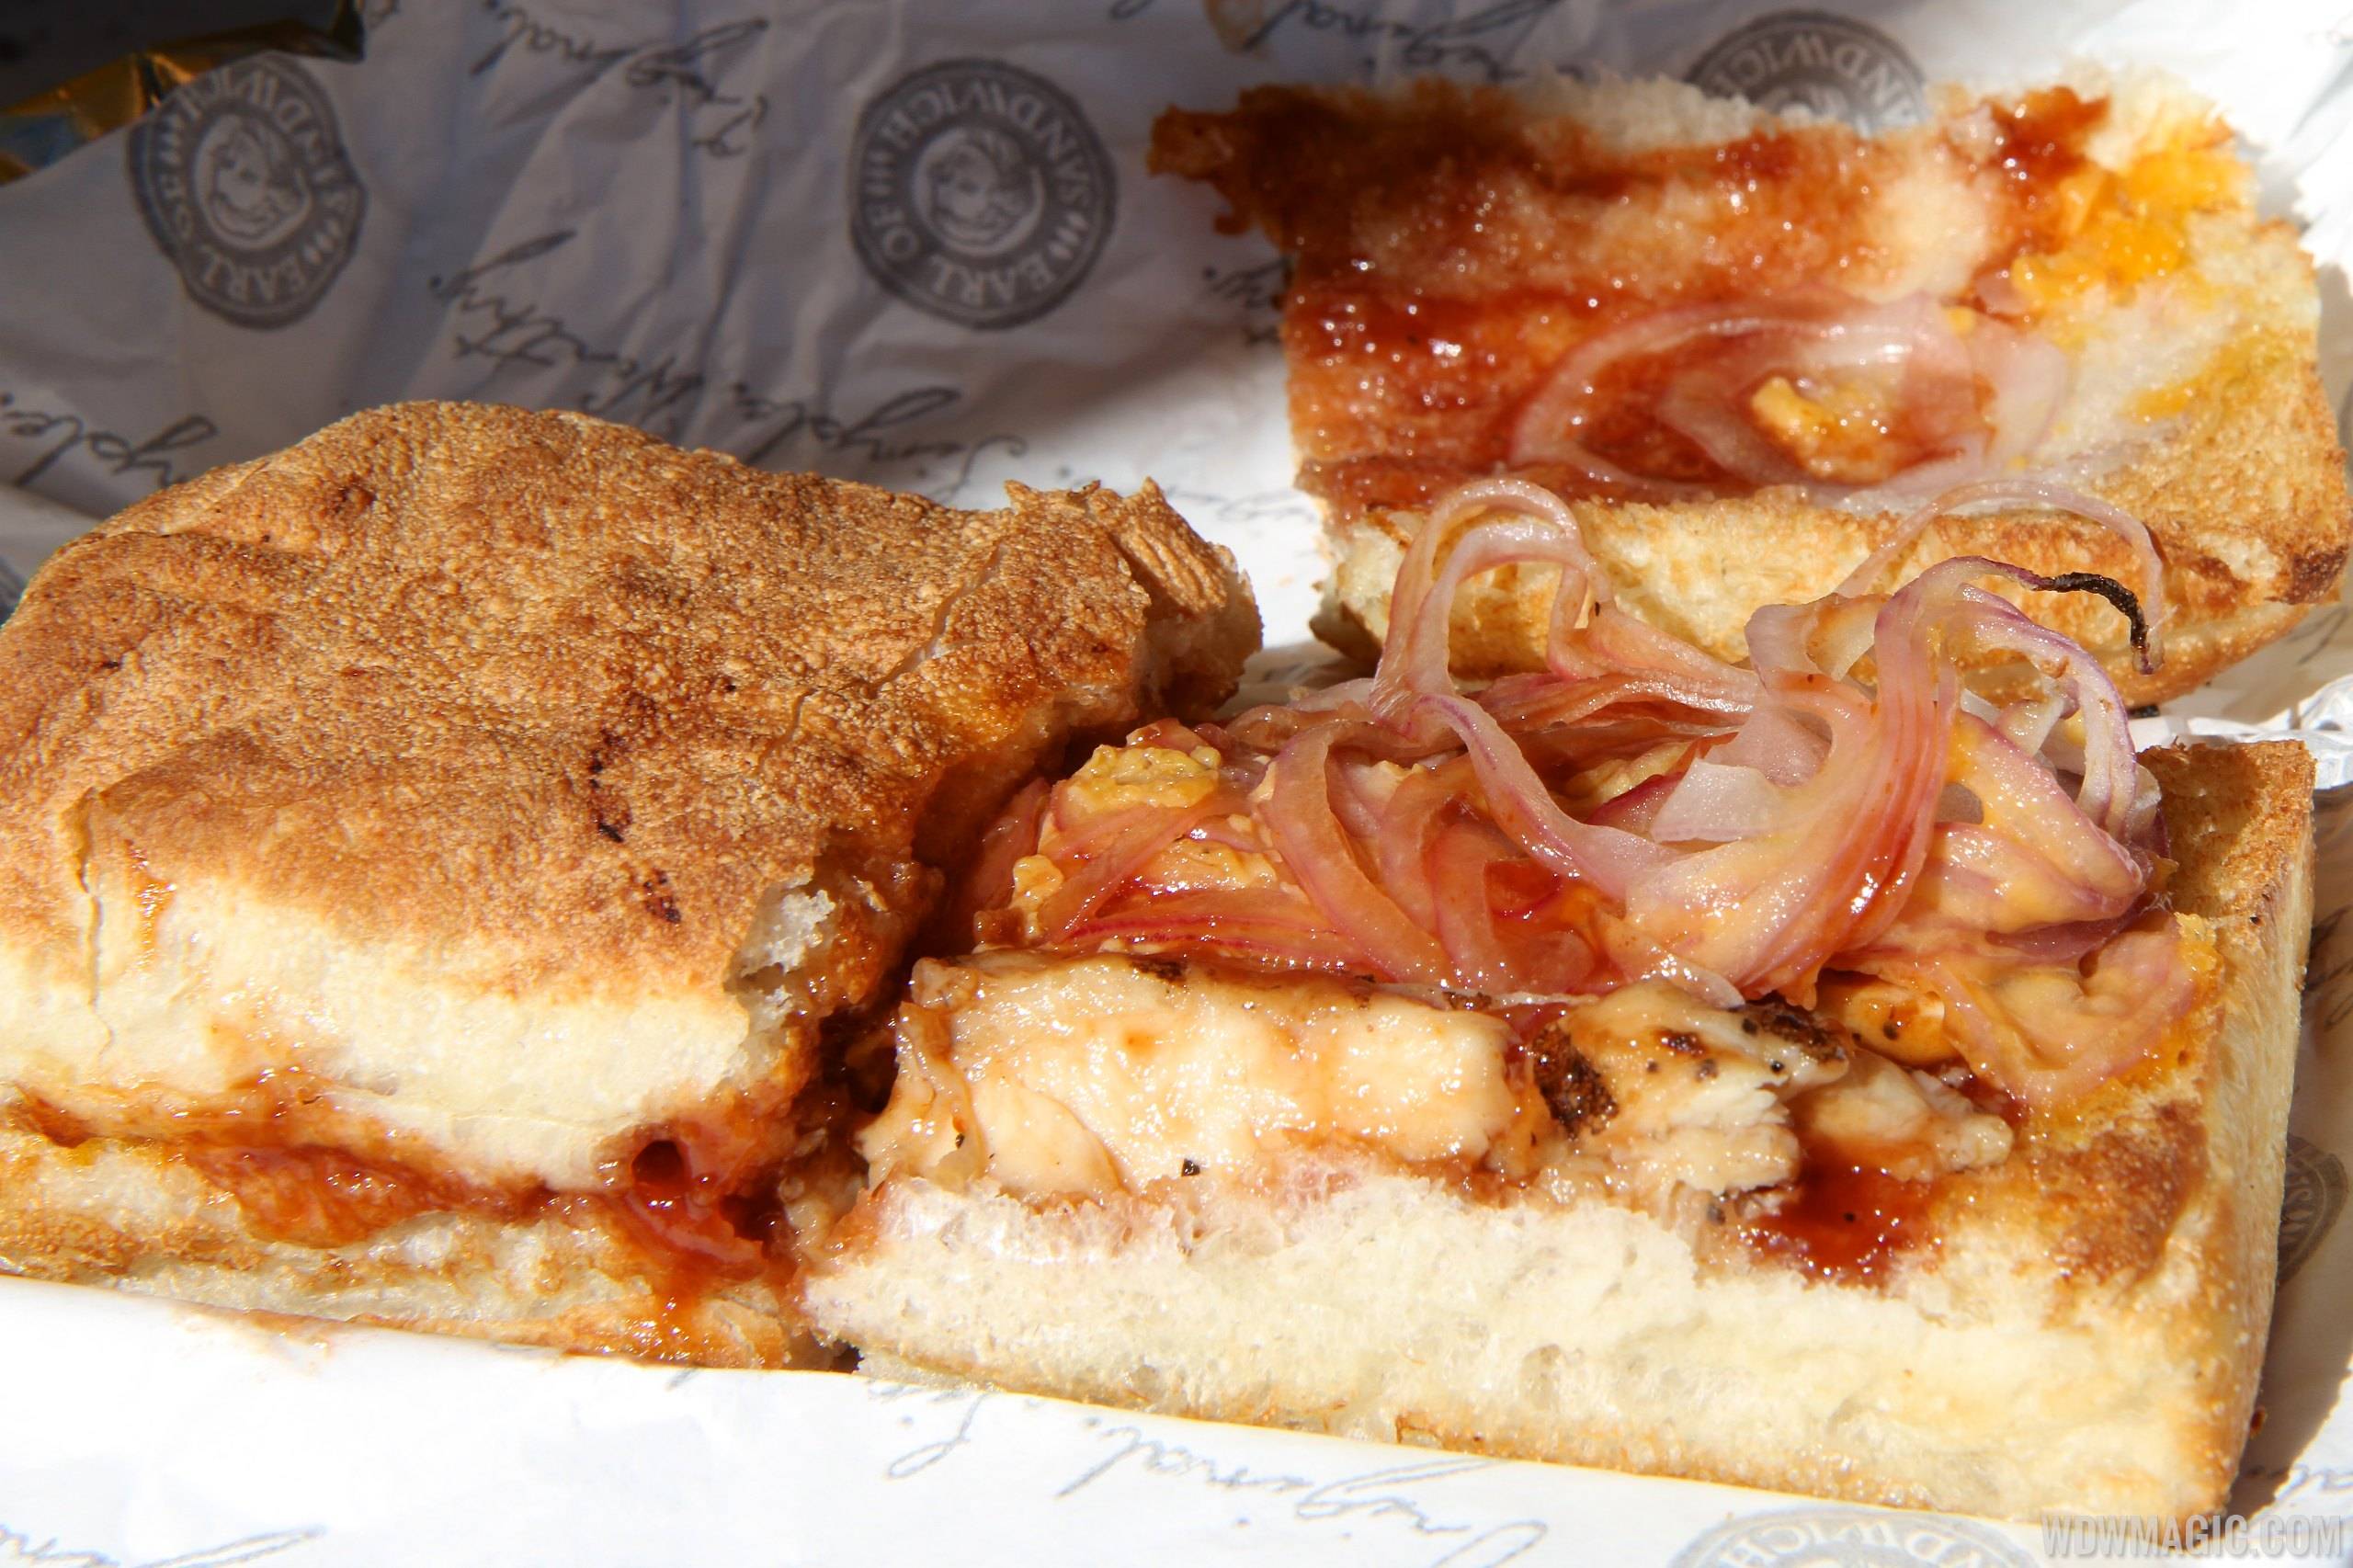 Earl of Sandwich - Limited edition BBQ Chicken and Philly Cheesesteak sandwiches